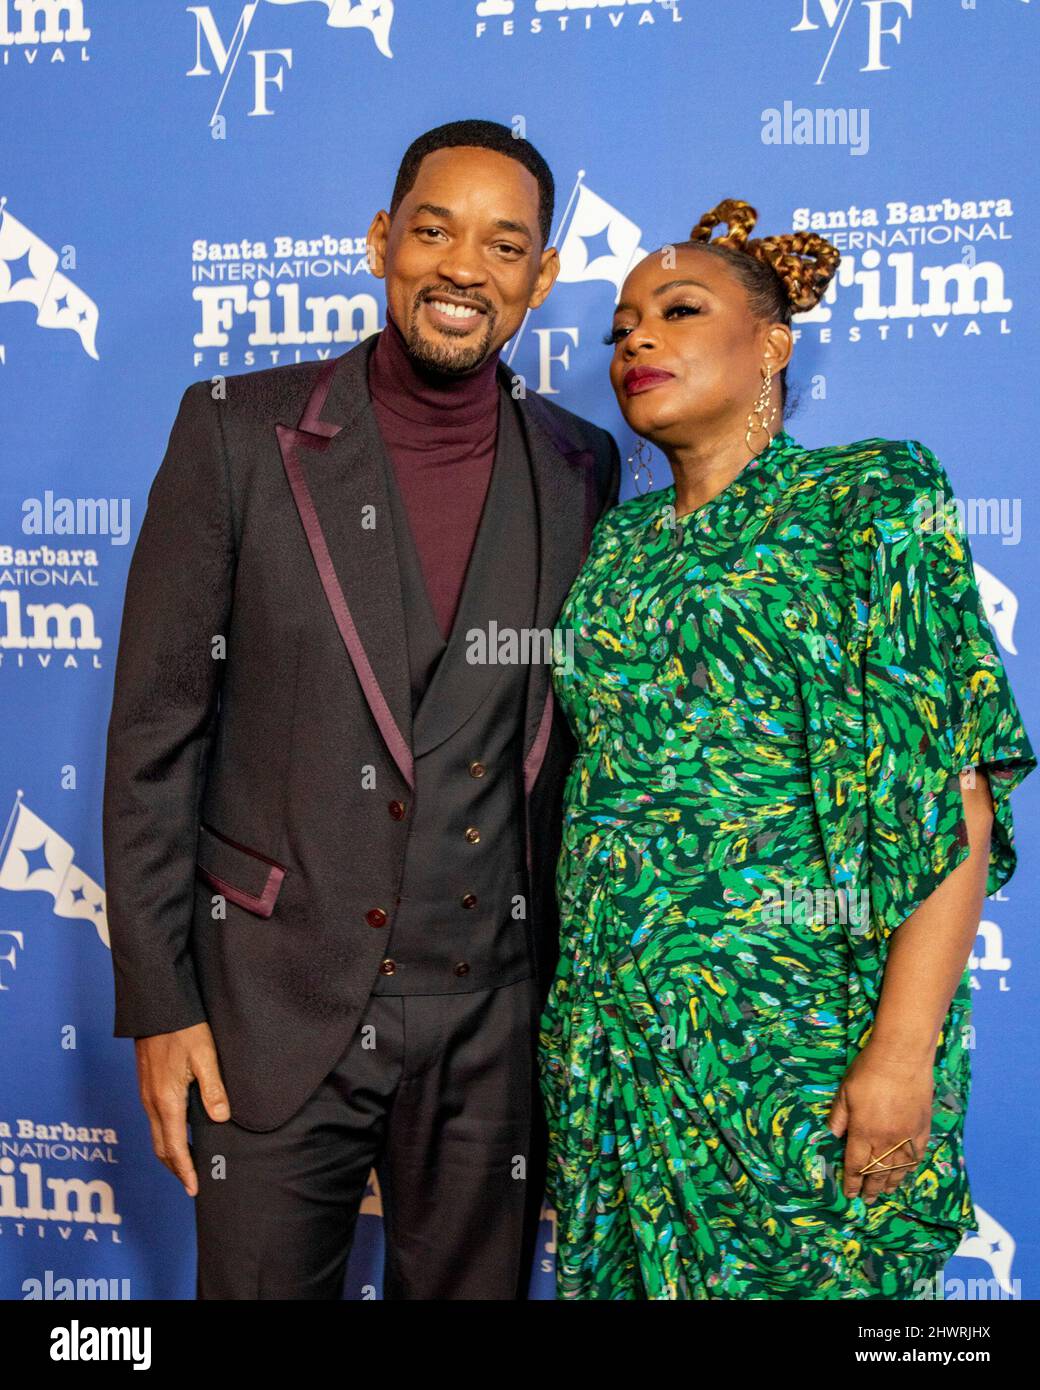 Red carpet arrivals, Will Smith and Aunjanue Ellis. The 37th Santa Barbara International Film Festival Honoring Will Smith and Aunjanue Ellis with the Outstanding Performers of the Year Award at the Arlington Theater in Santa Barbara, California, March 6, 2022.  (Photo by Rod Rolle/Sipa USA) Stock Photo